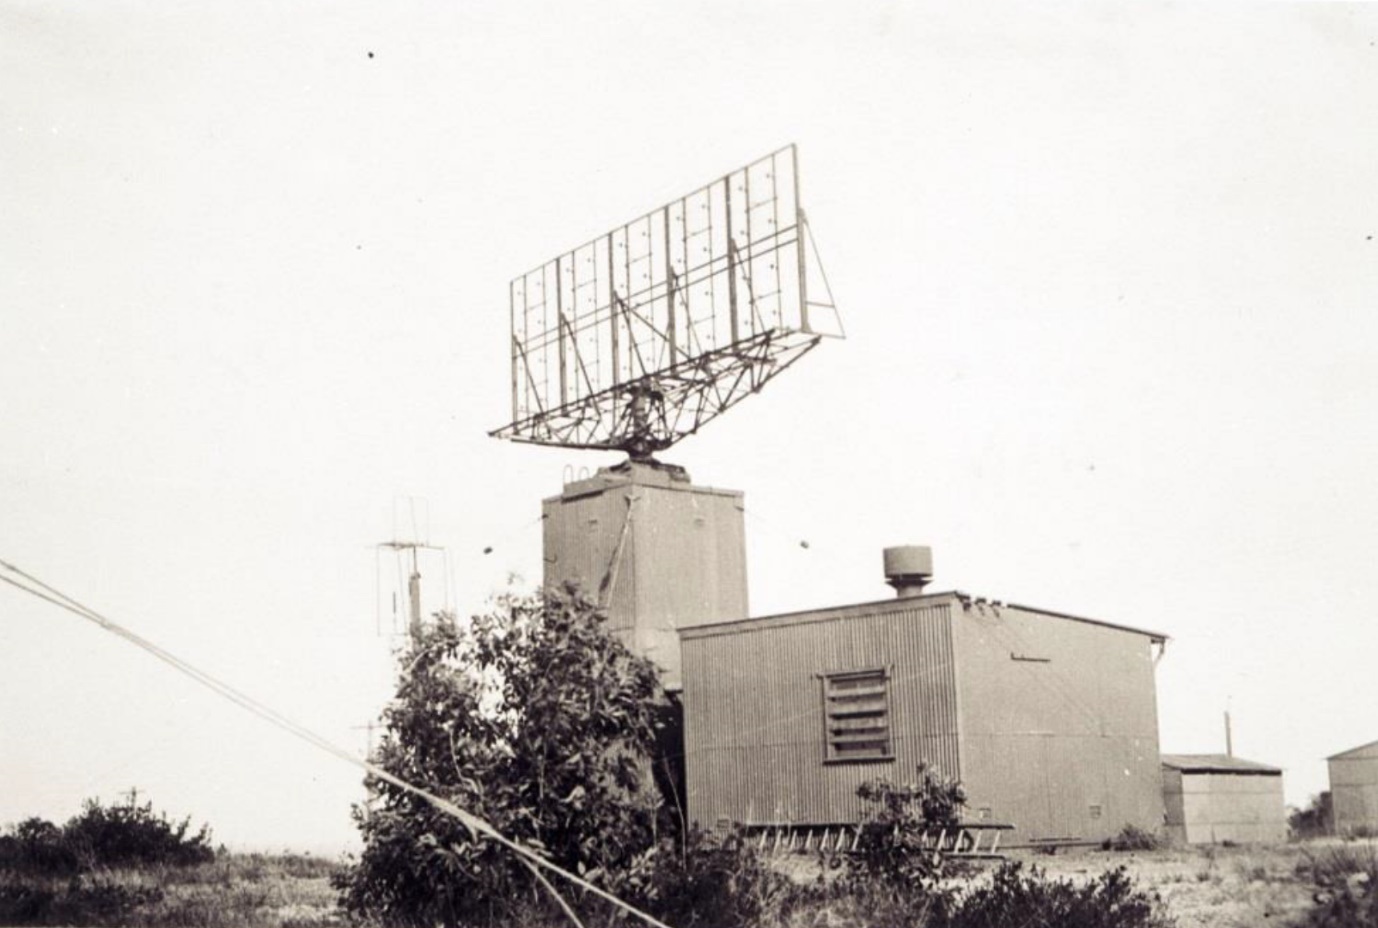 Black and white image of a building with a large antenna on the roof